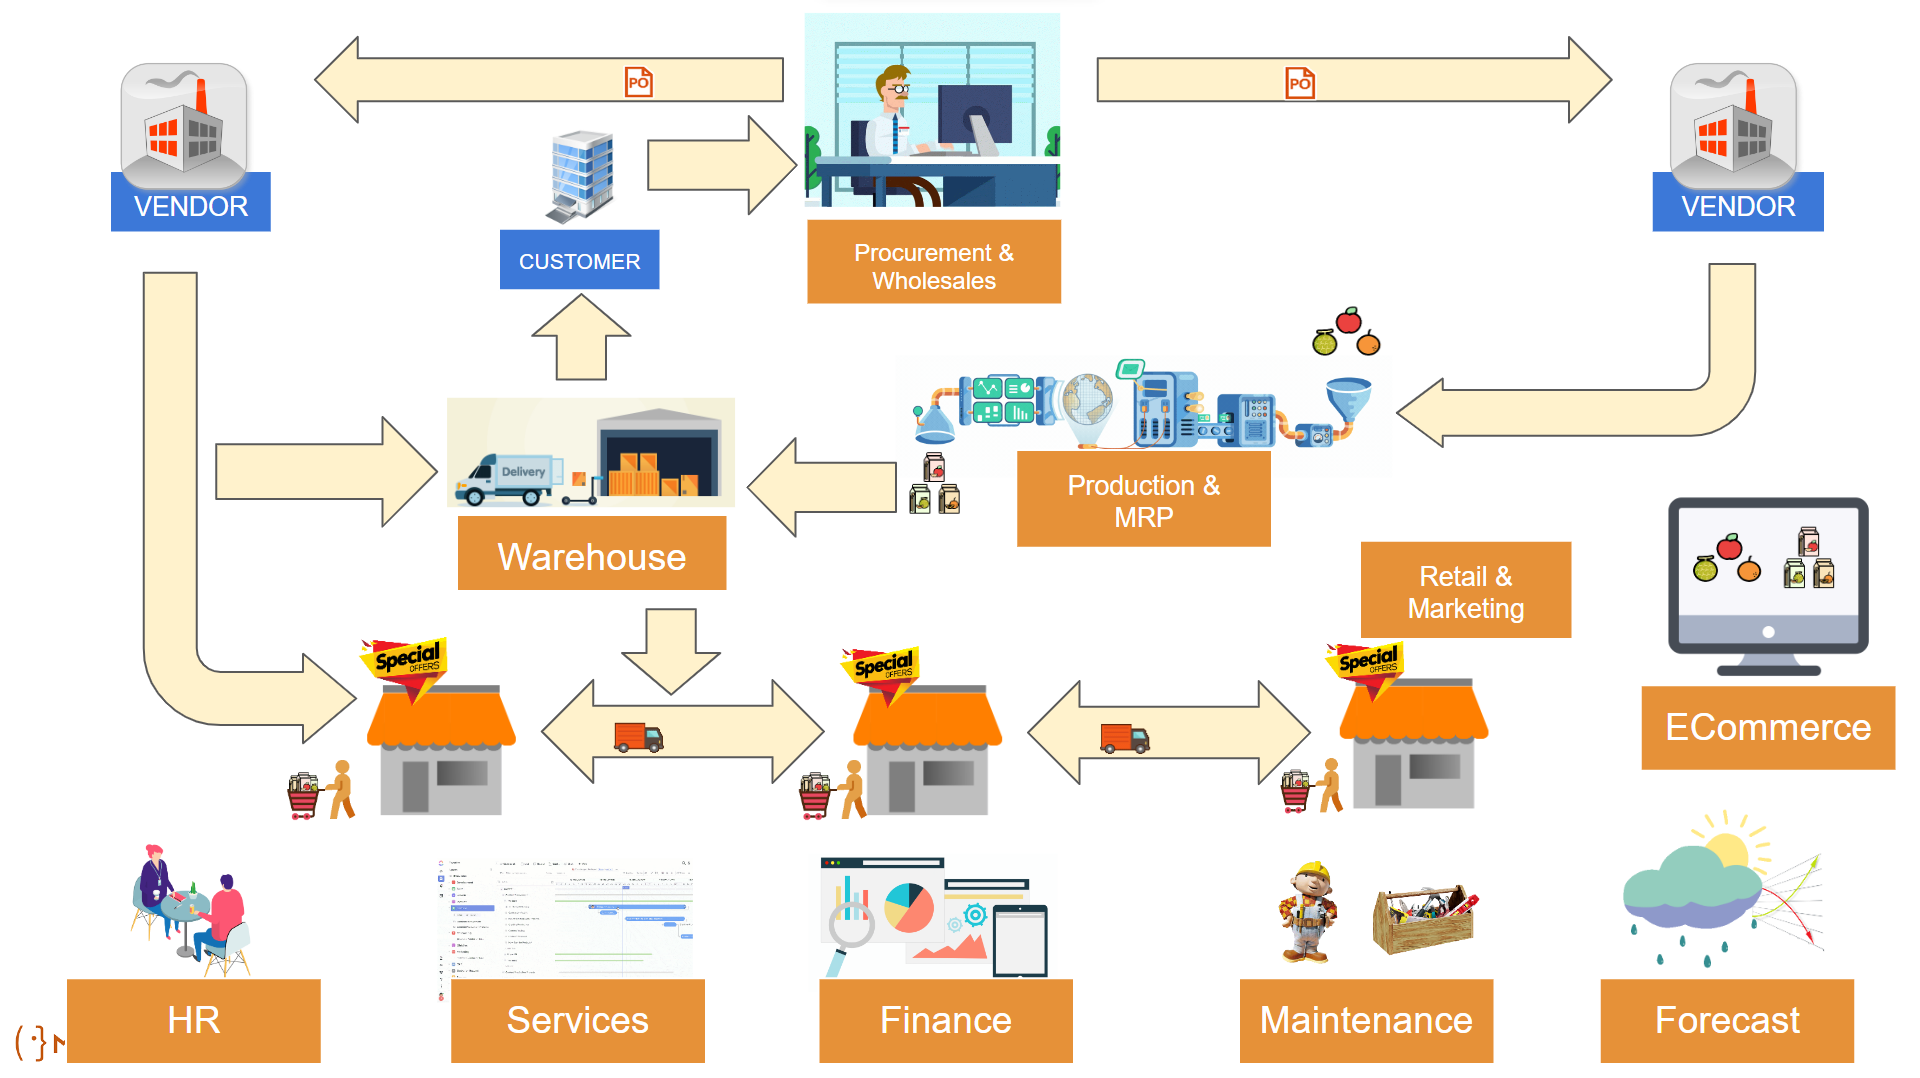 A colorful infographic depicting 13 interconnected departments in a business ecosystem. Starting from the top left, there's a 'Vendor' icon leading to a 'Customer' icon, symbolizing procurement and sales. This flows into a 'Warehouse' graphic, which connects to 'Retail & Marketing' and an 'ECommerce' computer icon. To the left, the process loops back to another 'Vendor' icon. Below, from left to right, there's an 'HR' illustration with people at a meeting table, a 'Services' icon with a document and gear, a 'Finance' section showing graphs and calculators, and a 'Maintenance' icon with tools and a toolbox. Completing the loop, there's a 'Forecast' section represented by a cloud with sun and rain. The entire graphic demonstrates the cyclical nature of business operations, with each department contributing to an integrated workflow.